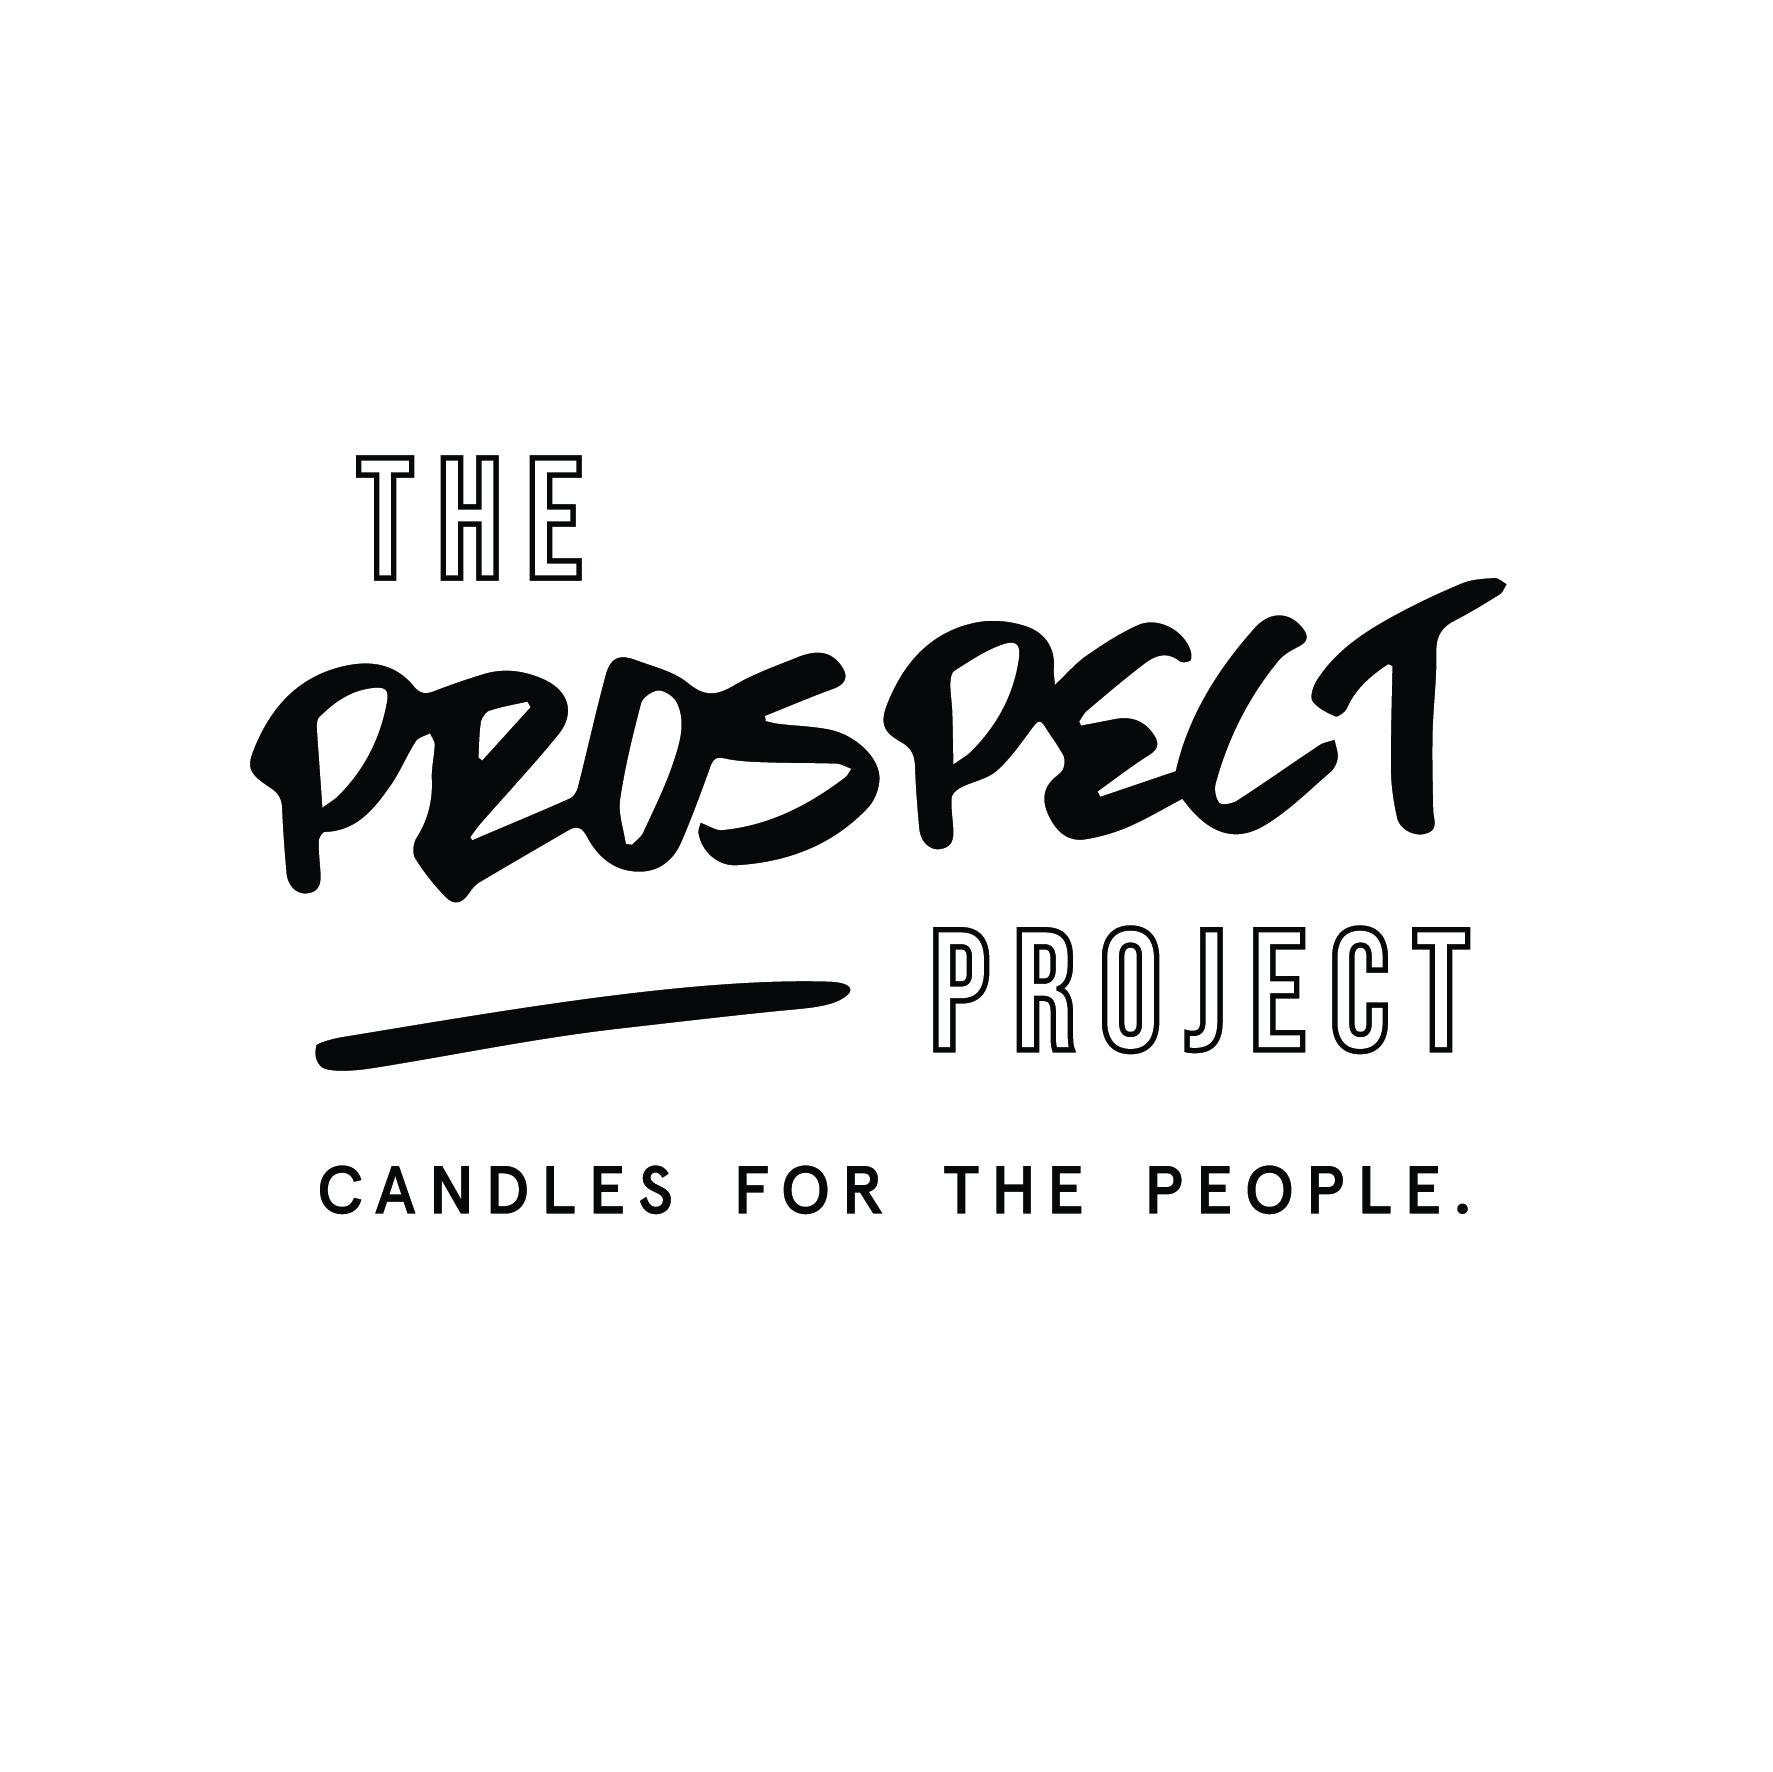 Pine & Fur Needle, Sandalwood & Patchouli, The Prospect Project Soy Candles